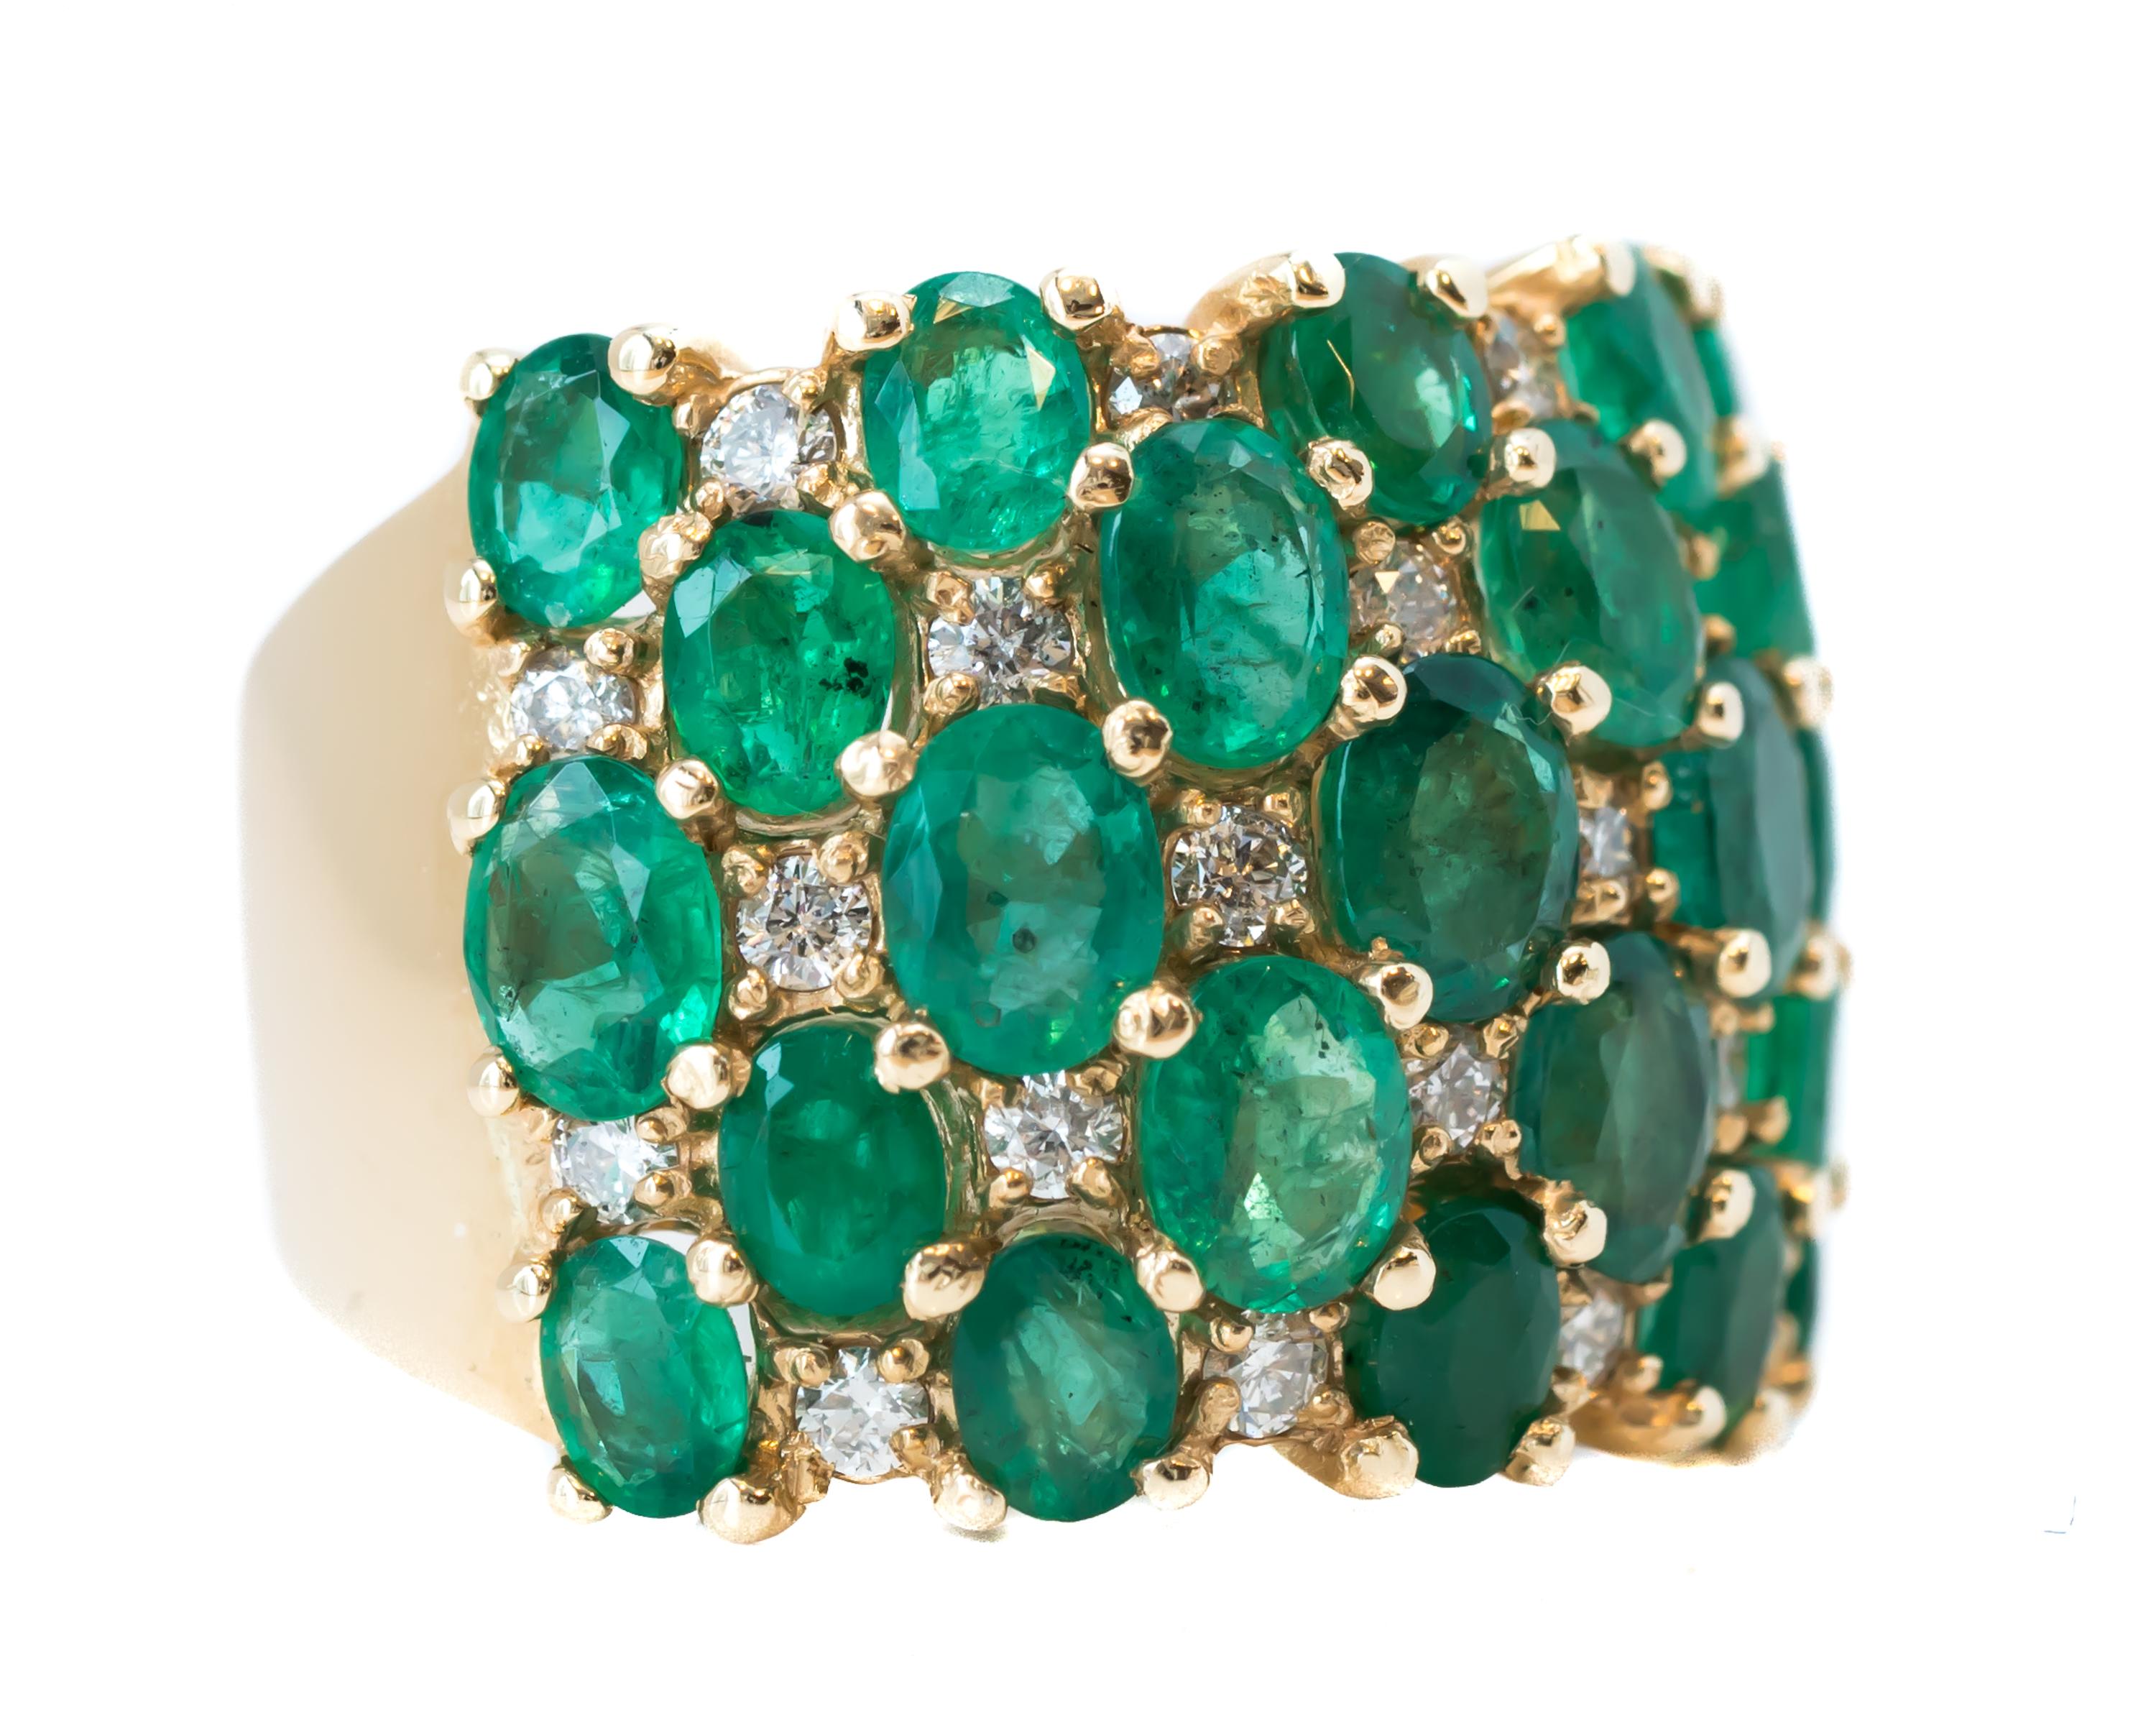 Features:
10.0 carats of Green Emeralds, Oval Cut
0.50 carat of Round Brilliant Diamonds
All diamonds and emeralds are prong set 
Crafted in 14 karat Yellow Gold

Band width tapers from 17.5 - 4.5 millimeters
Finger to top of stone measures 4